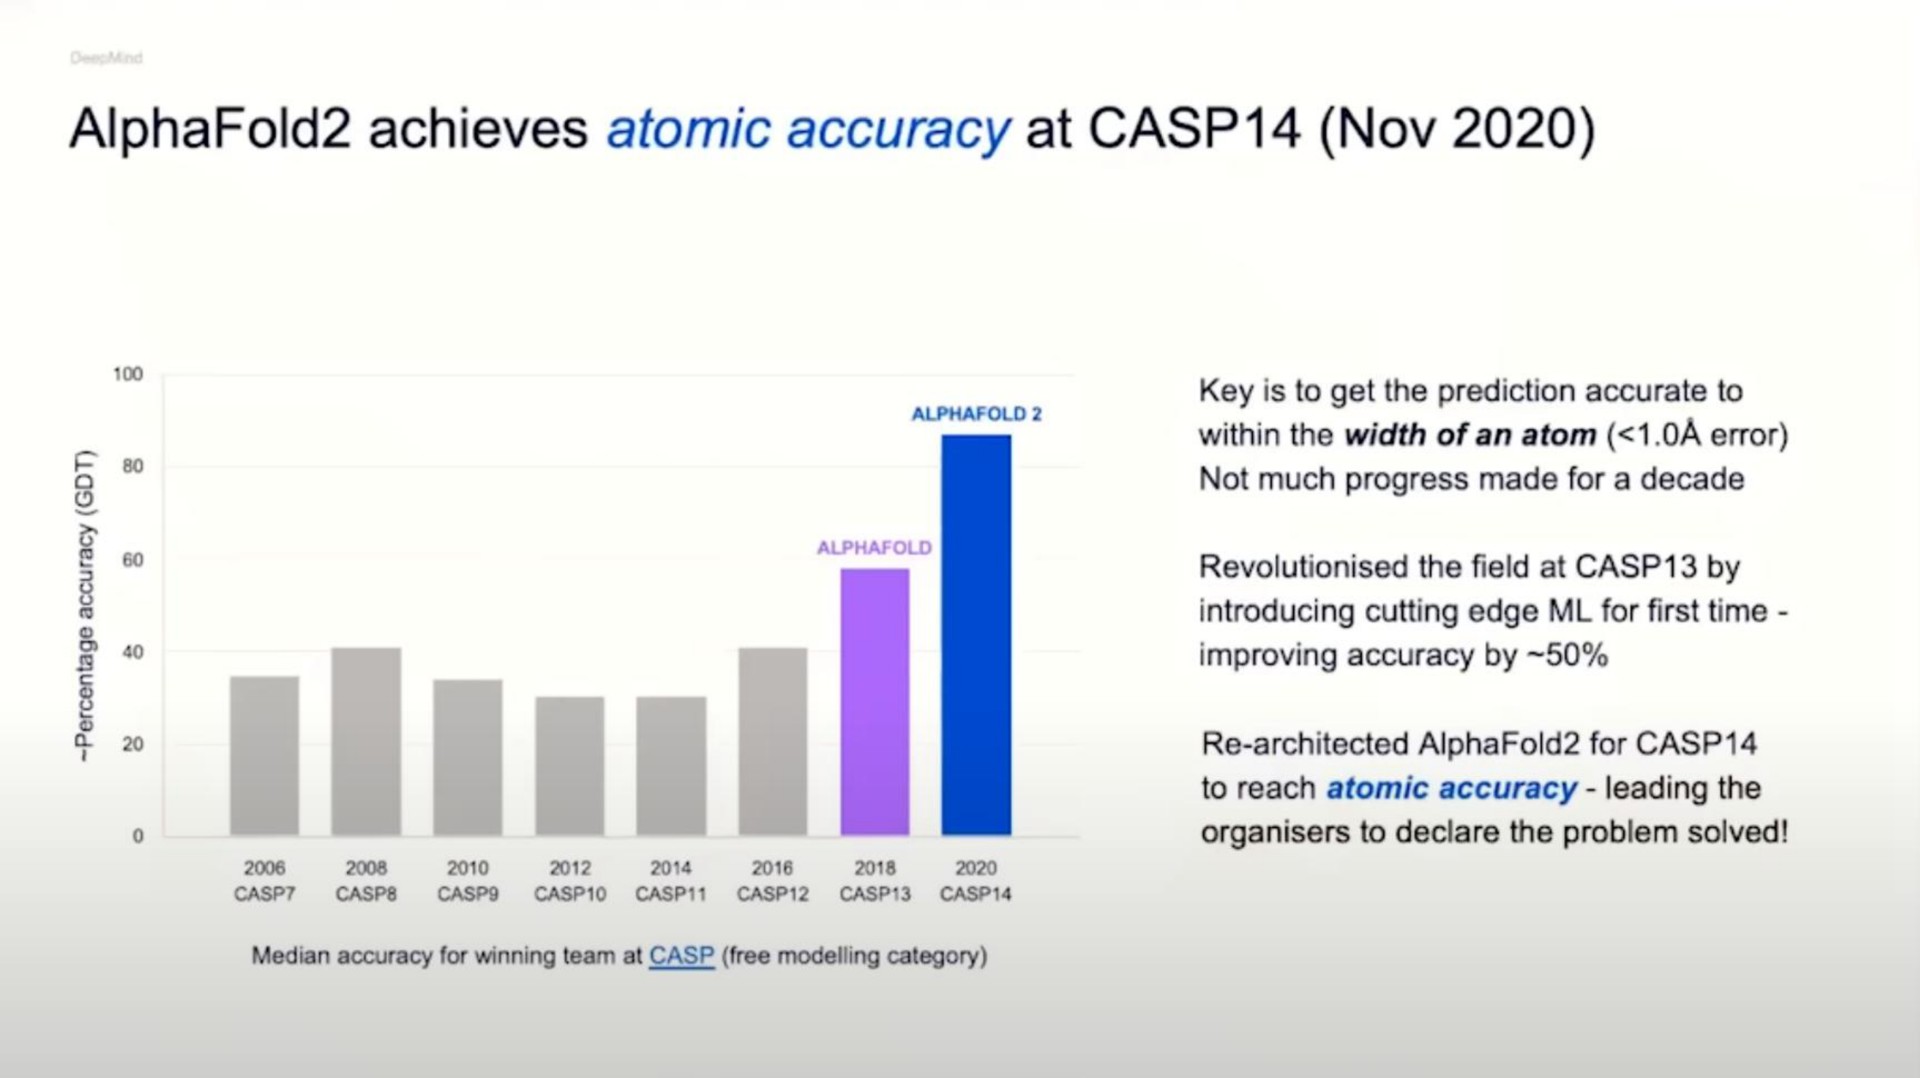 achieves atomic accuracy at a a a key is to get the prediction accurate to within the width of an atom a error not much progress made for a decade the field at by introducing cutting edge for first time improving accuracy by for to reach atomic accuracy leading the to declare the problem solved median accuracy for winning team at free modelling category | DeepMind